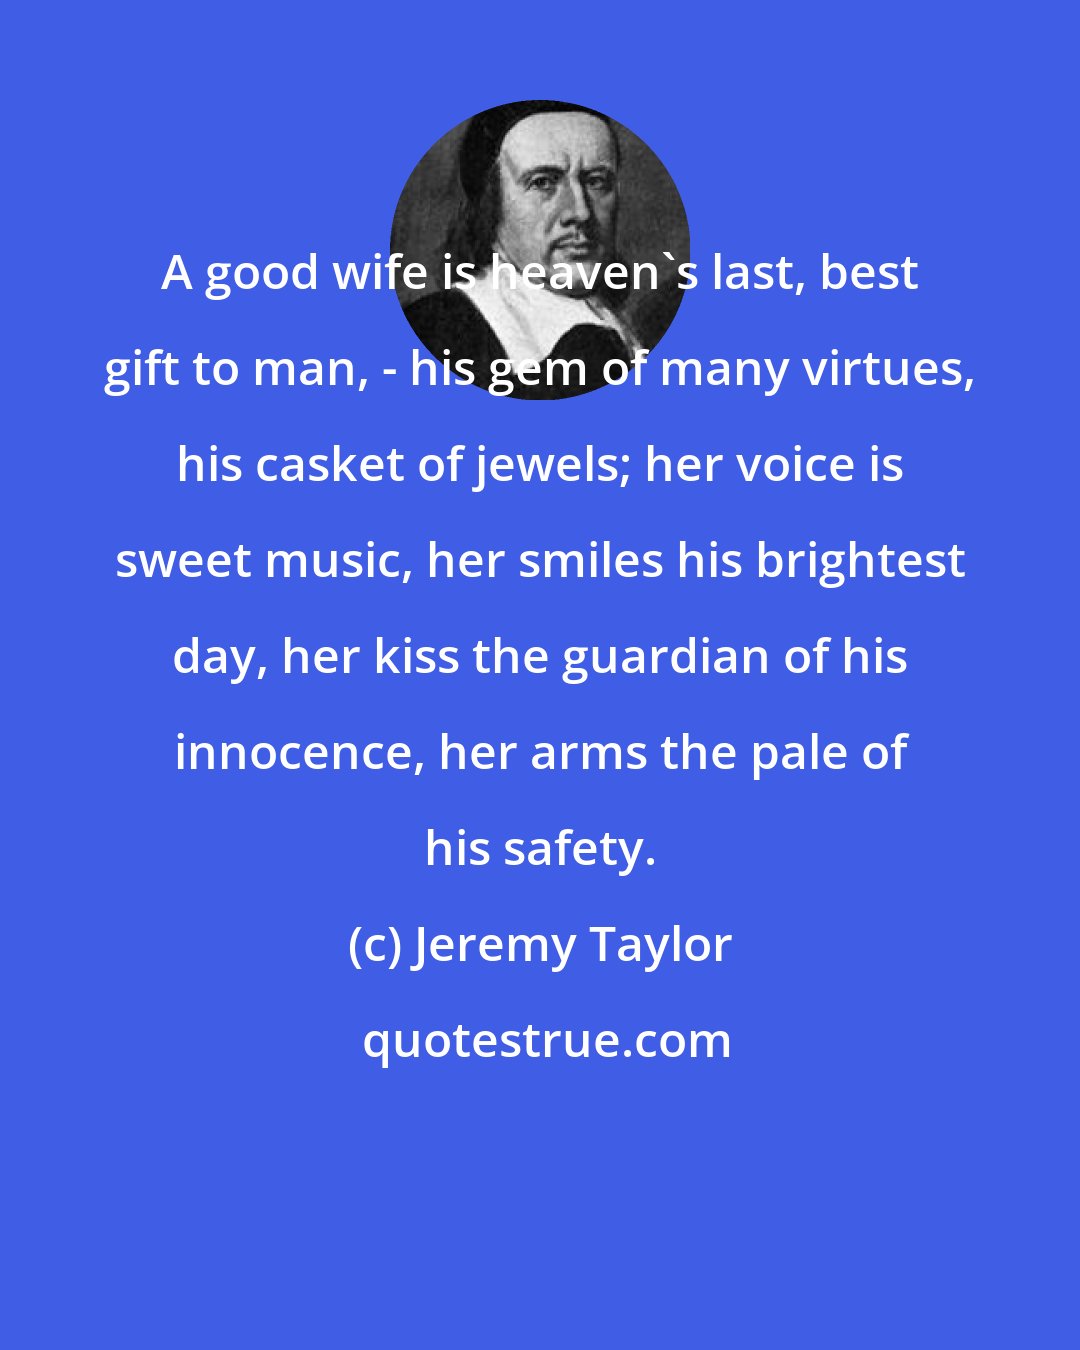 Jeremy Taylor: A good wife is heaven's last, best gift to man, - his gem of many virtues, his casket of jewels; her voice is sweet music, her smiles his brightest day, her kiss the guardian of his innocence, her arms the pale of his safety.